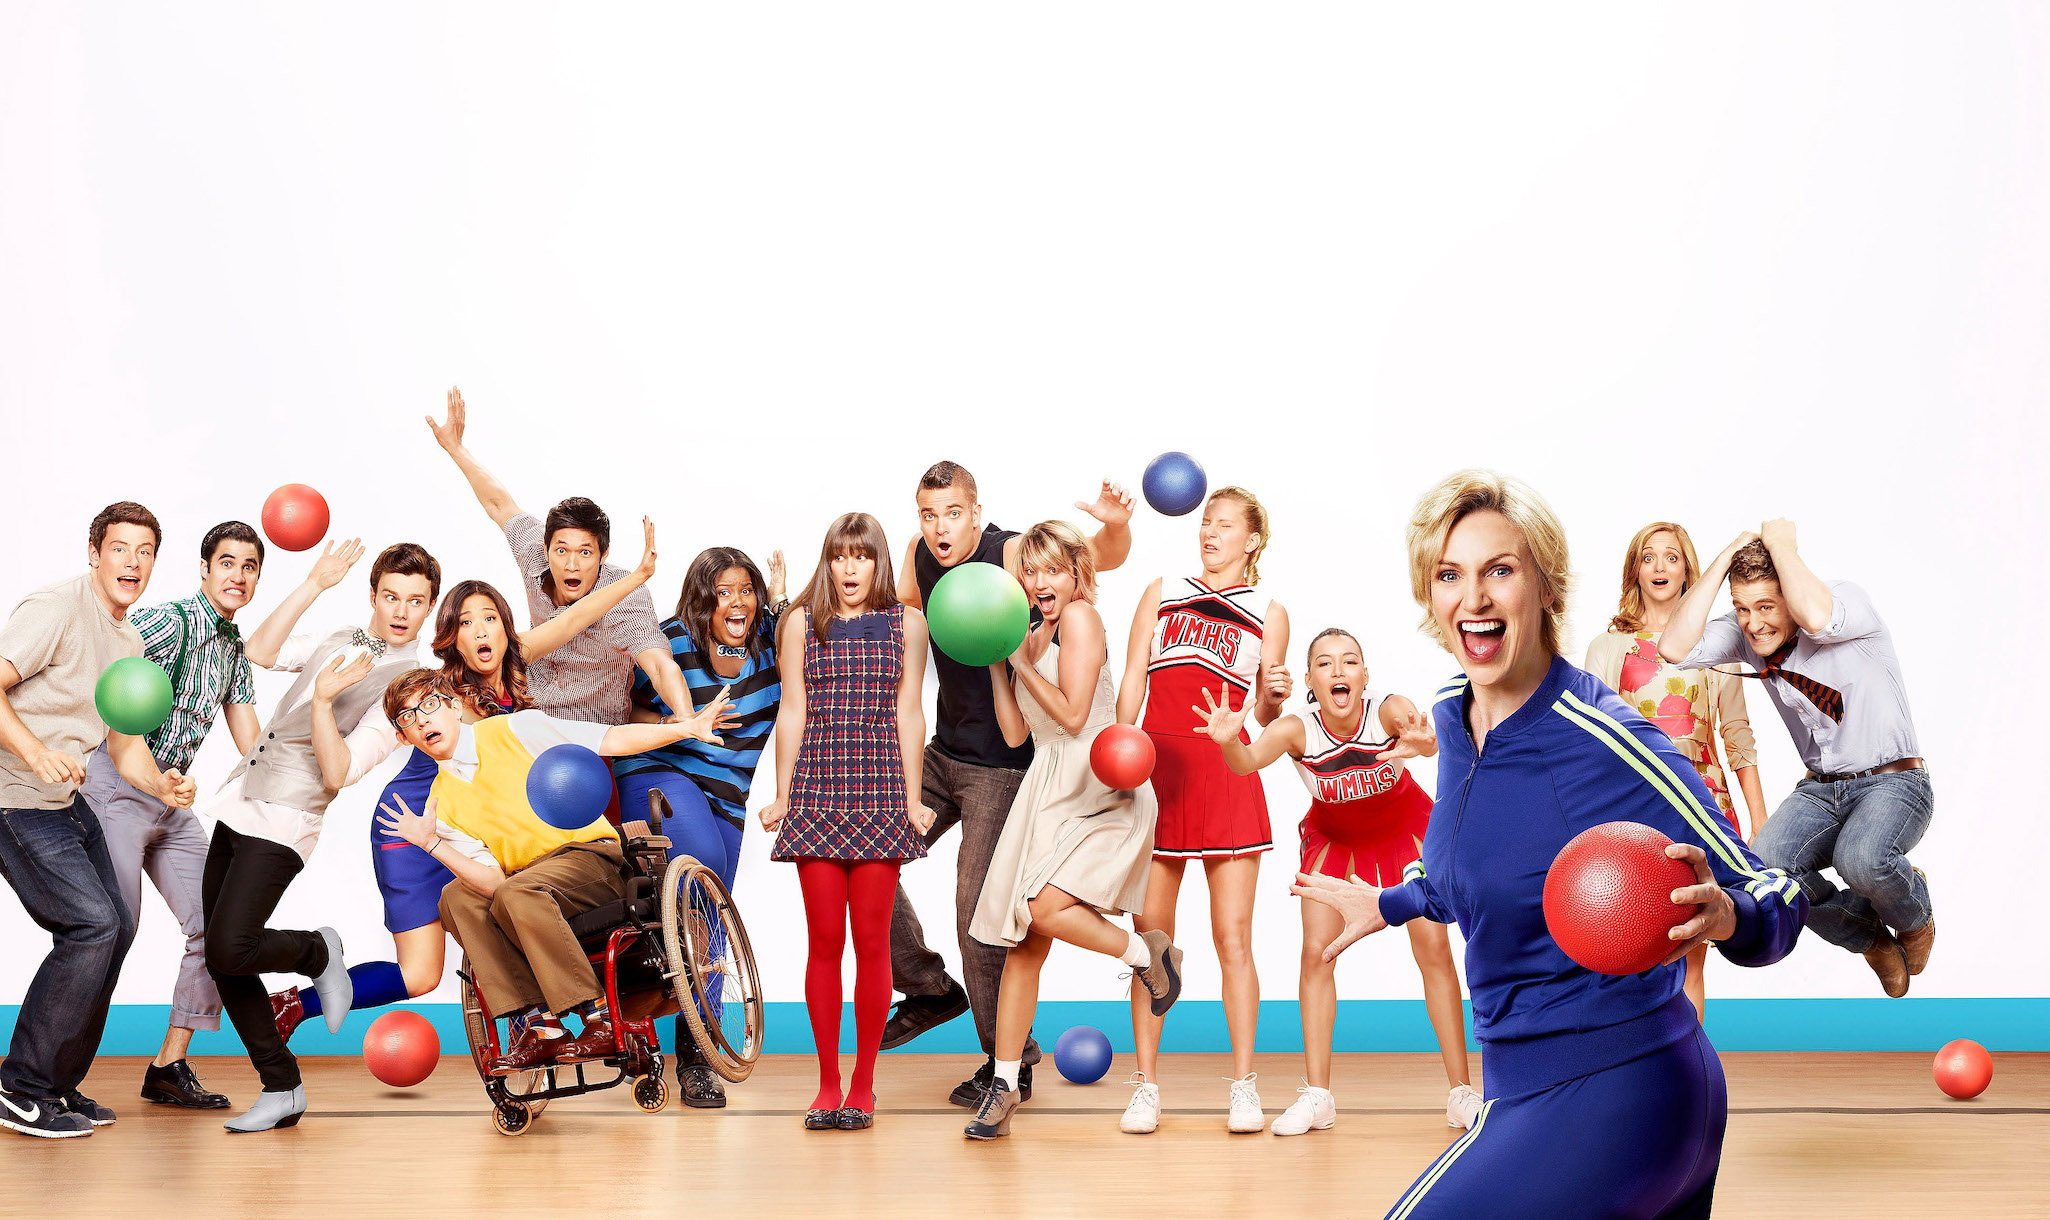 The New Directions of 'Glee' in a Season 3 promo photo.